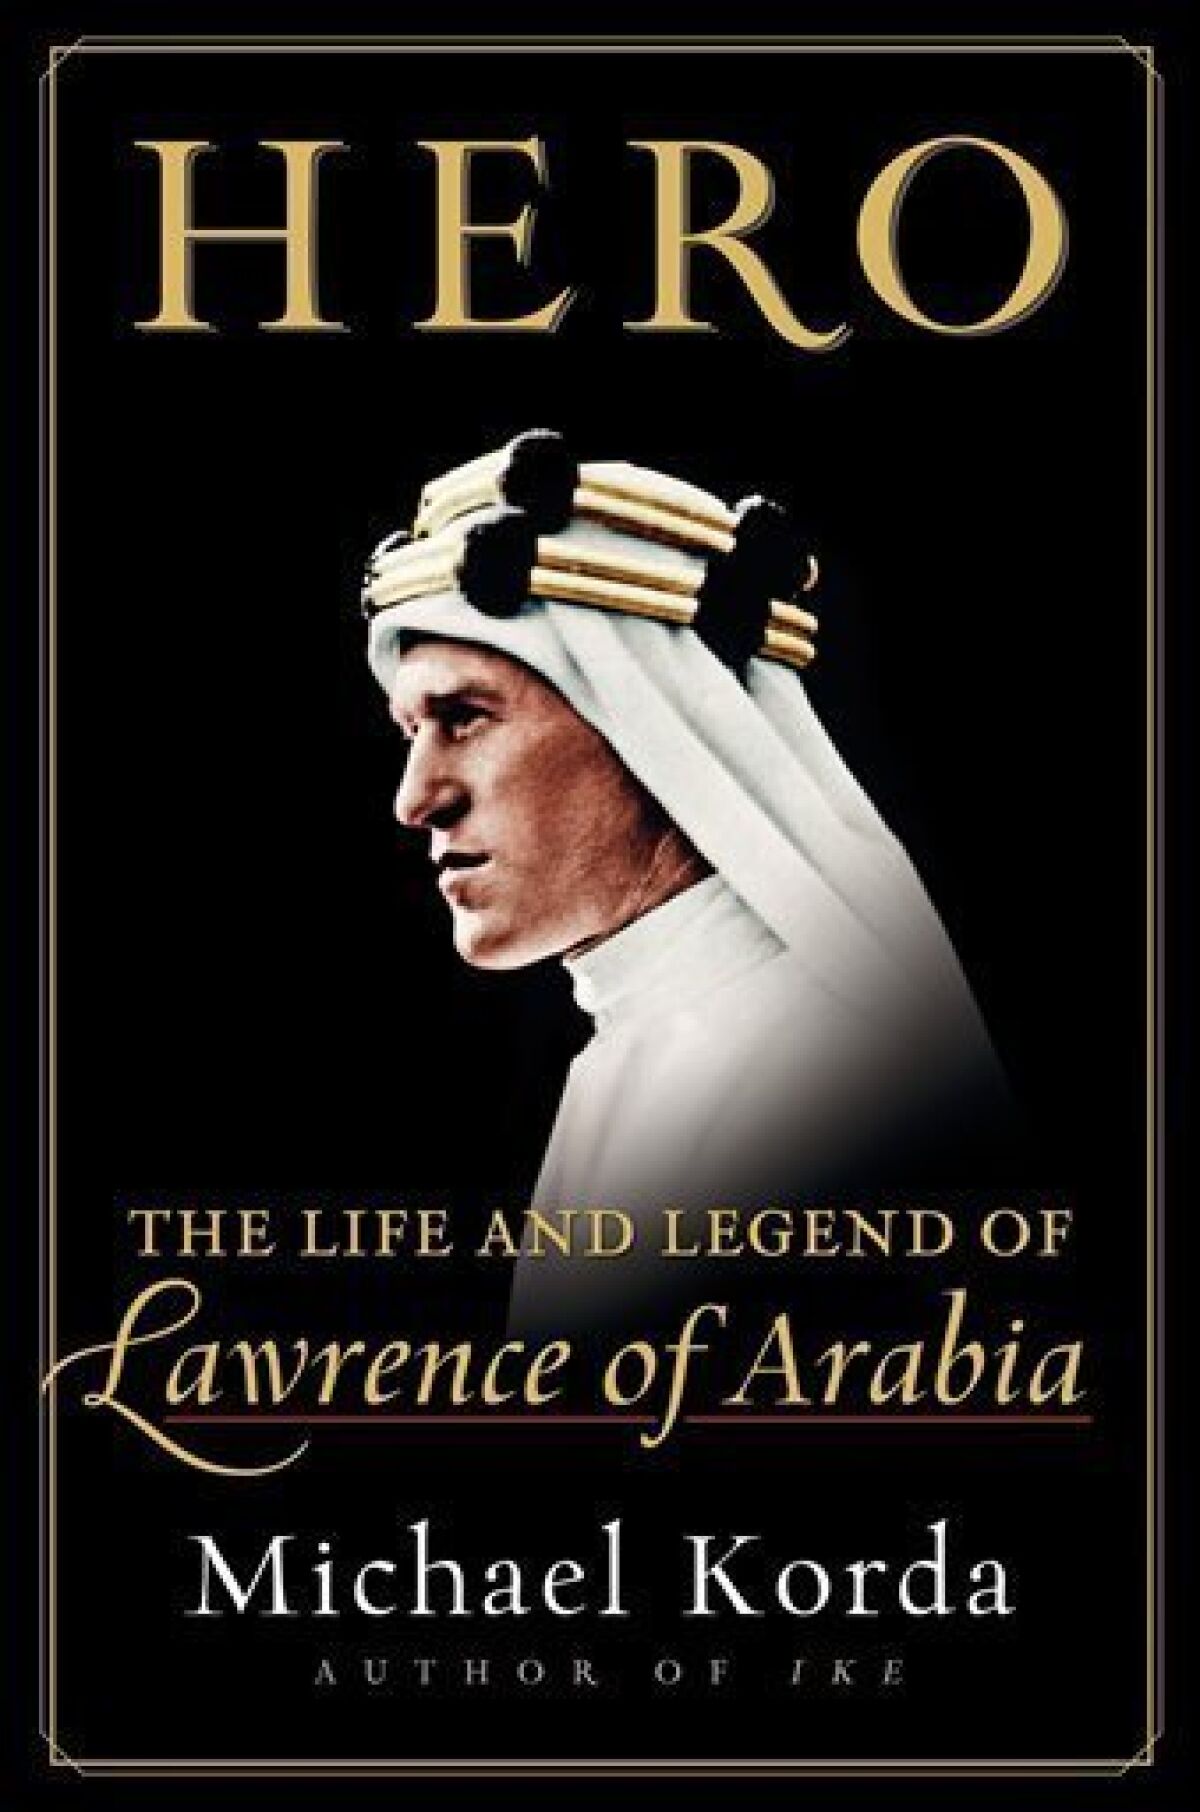 In this book cover image released by HarperCollins, "Hero: The Life and Legend of Lawrence of Arabia," by Michael Korda is shown. (AP Photo/HarperCollins)